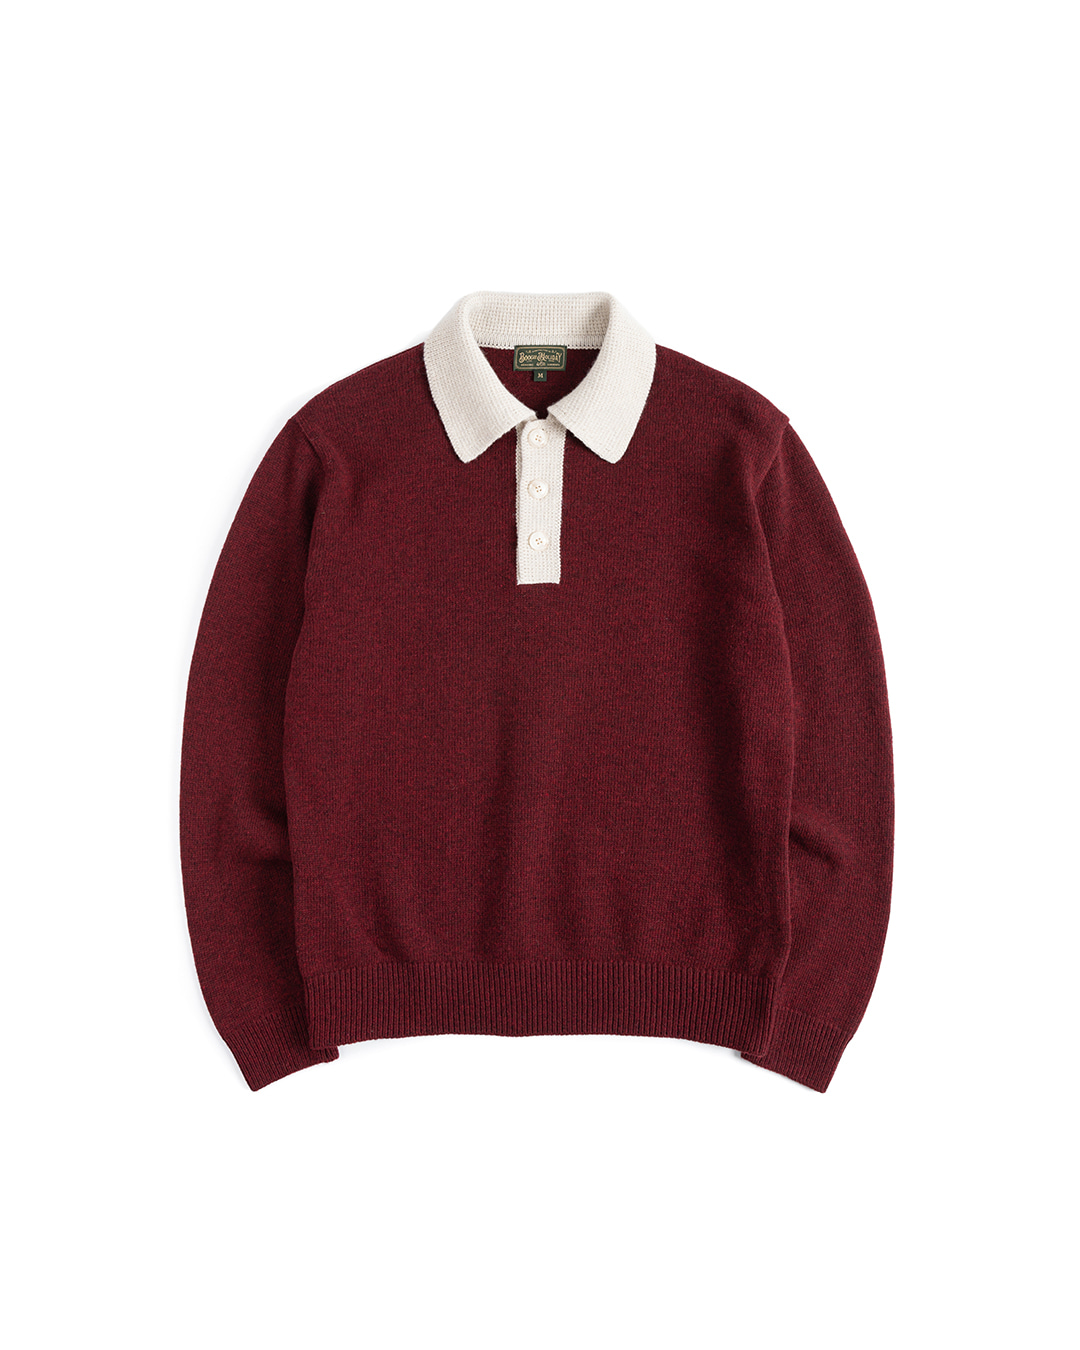 10 KNITTED RUGBY SHIRT (dark red)